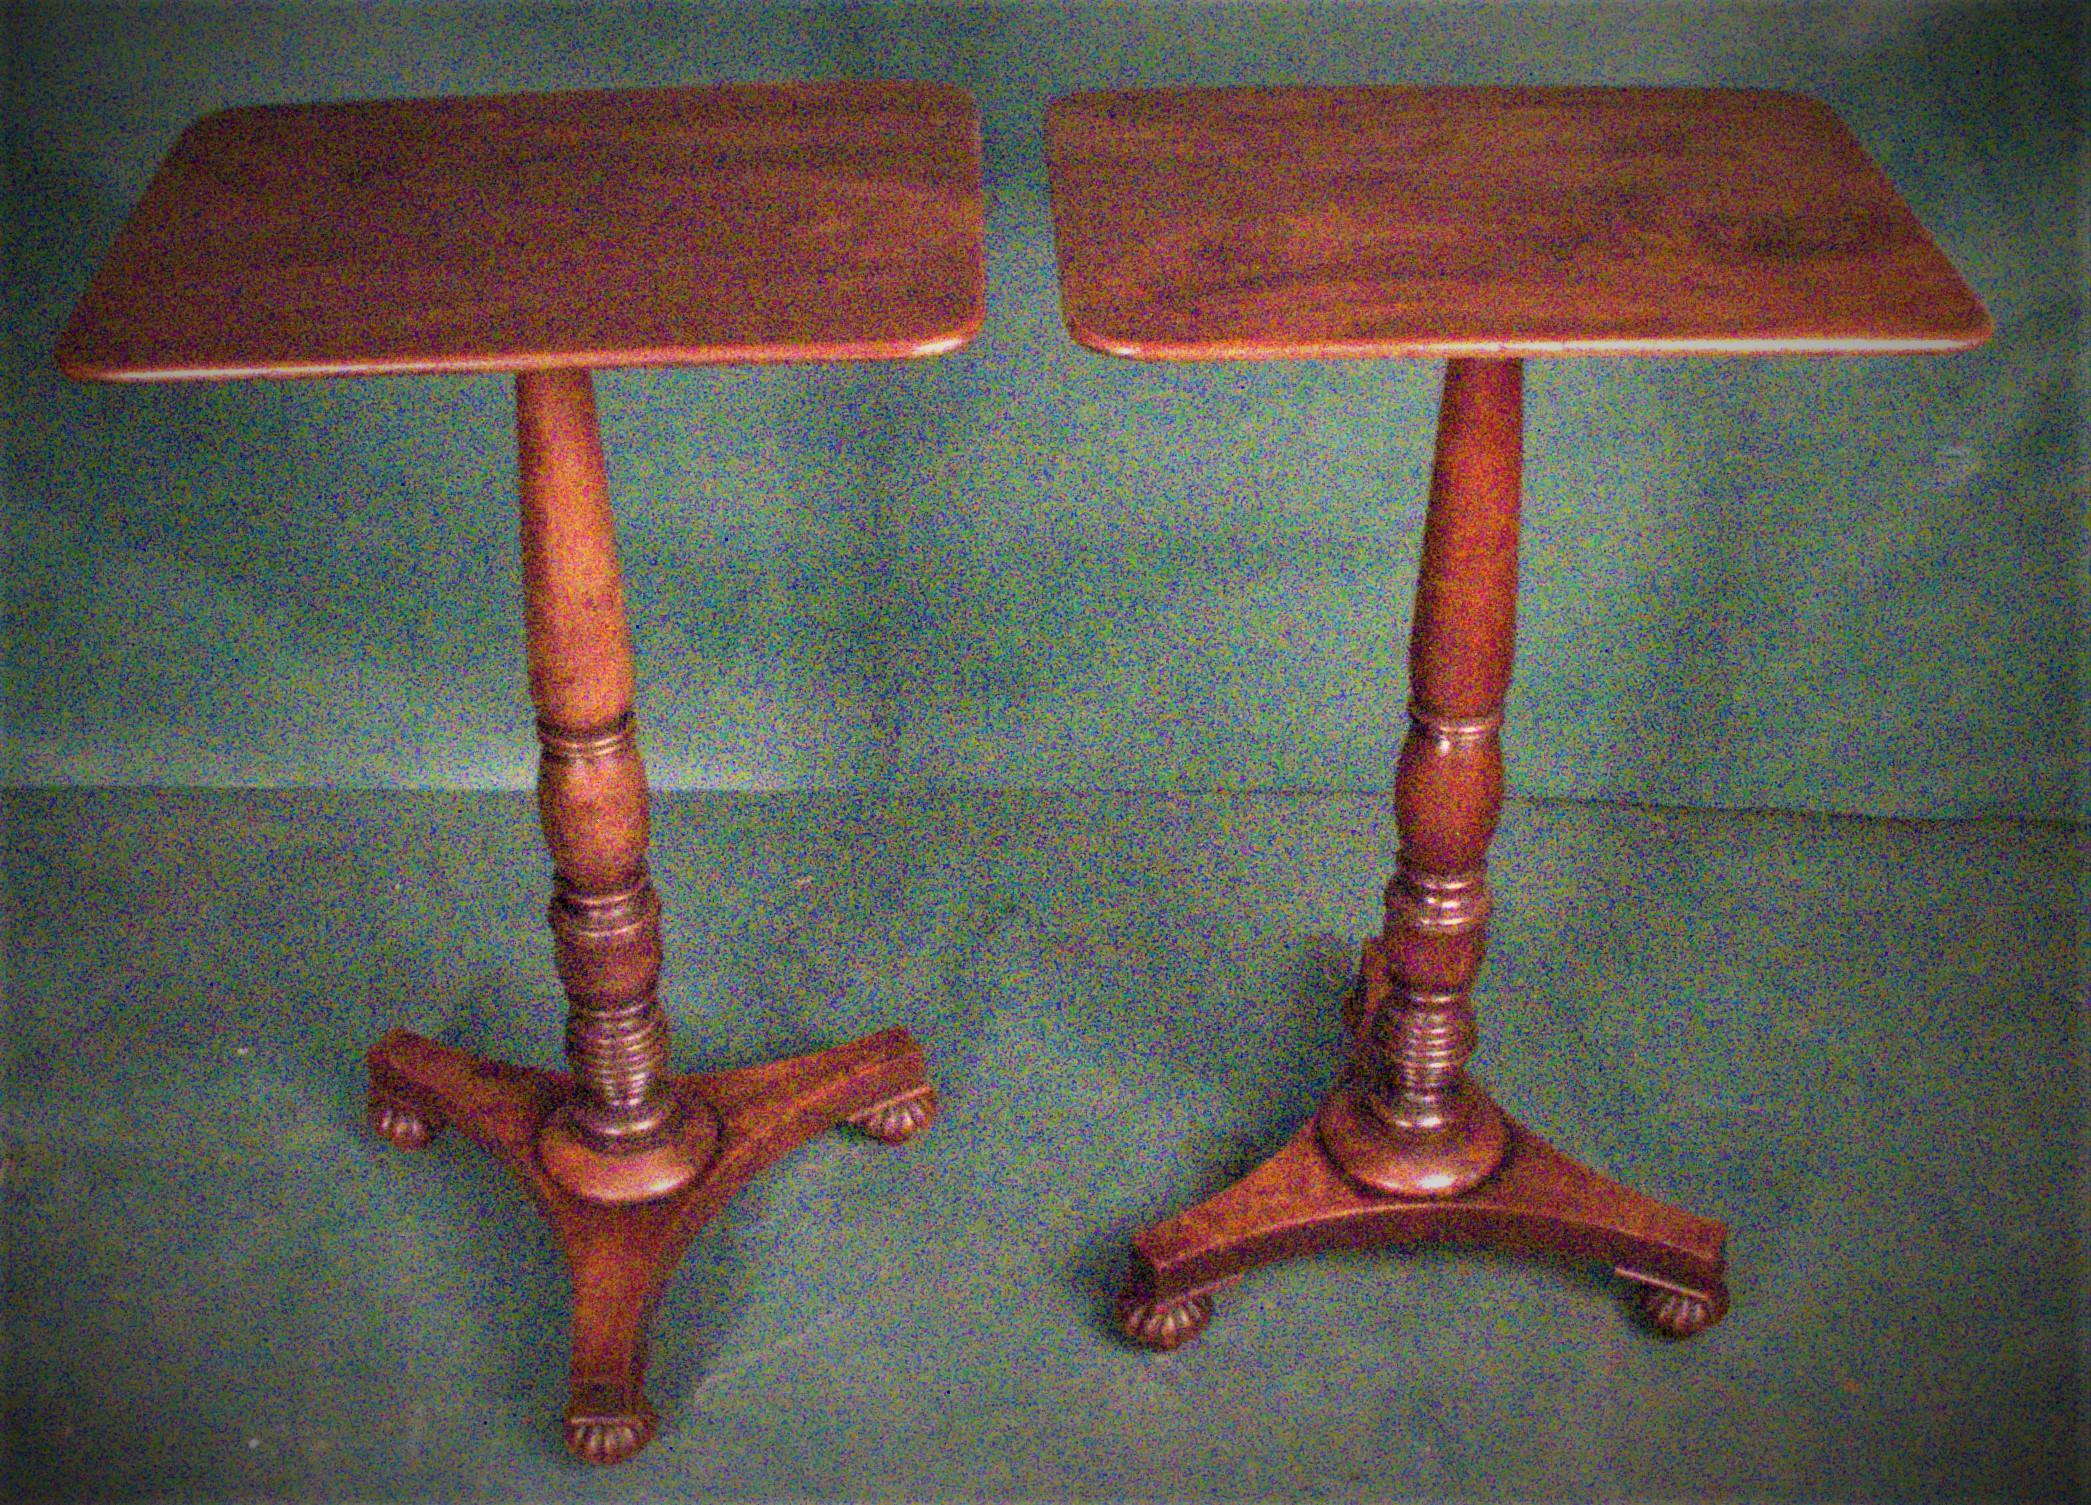 A fine pair of Tables in mahogany ..   measuurements are approximate